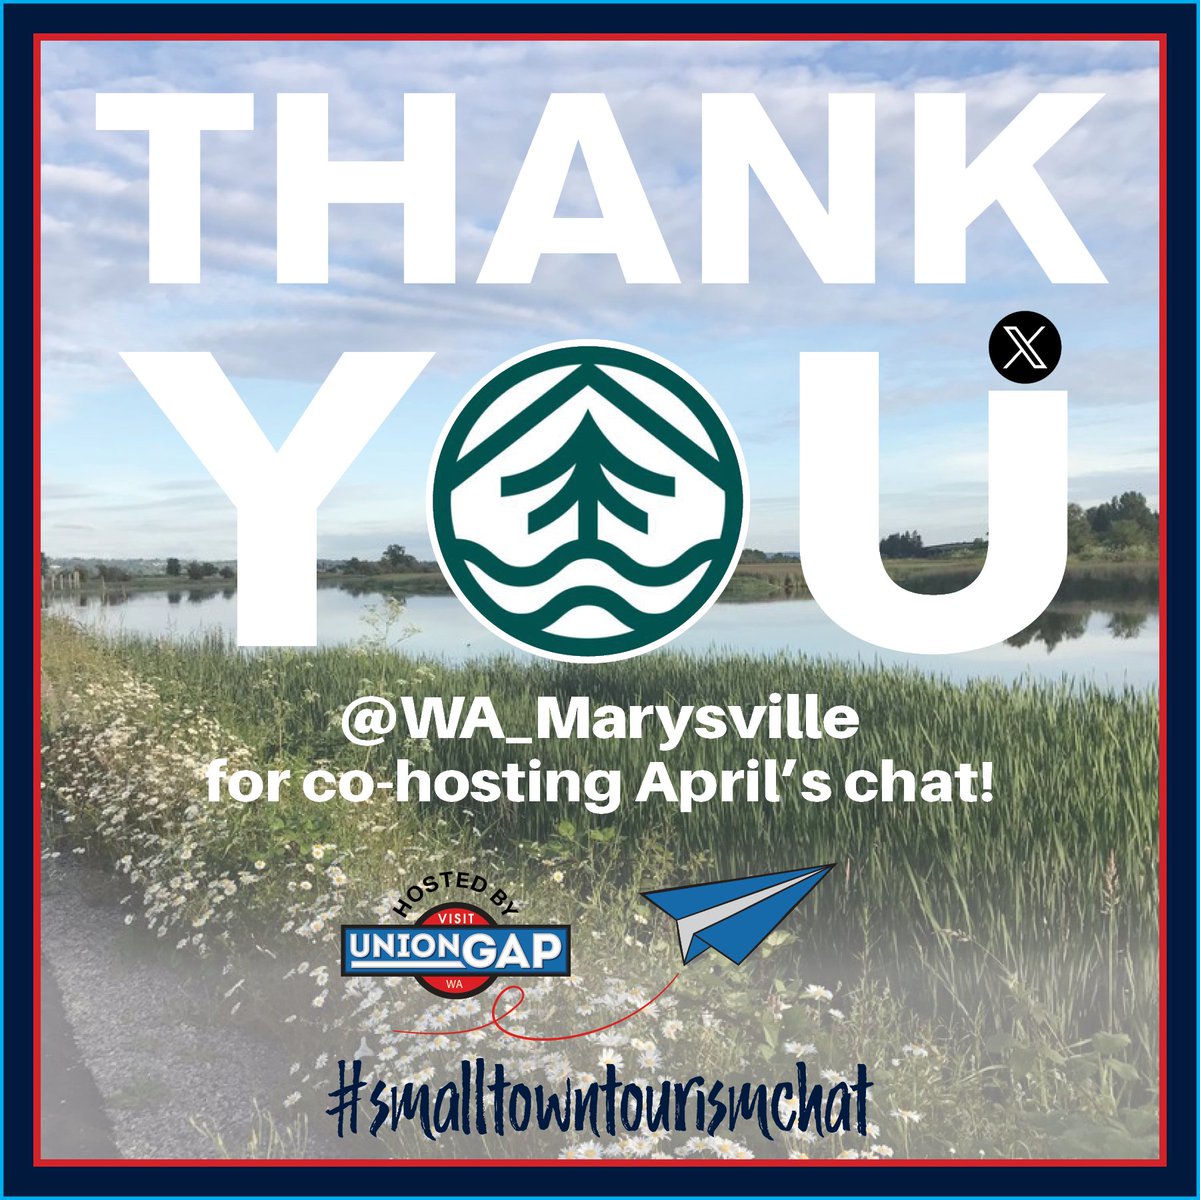 Another hearty thanks to @WA_Maryville for cohosting this month! It was great to see you again, and a #roadtrip your way is long overdue! #SmallTownTourismChat